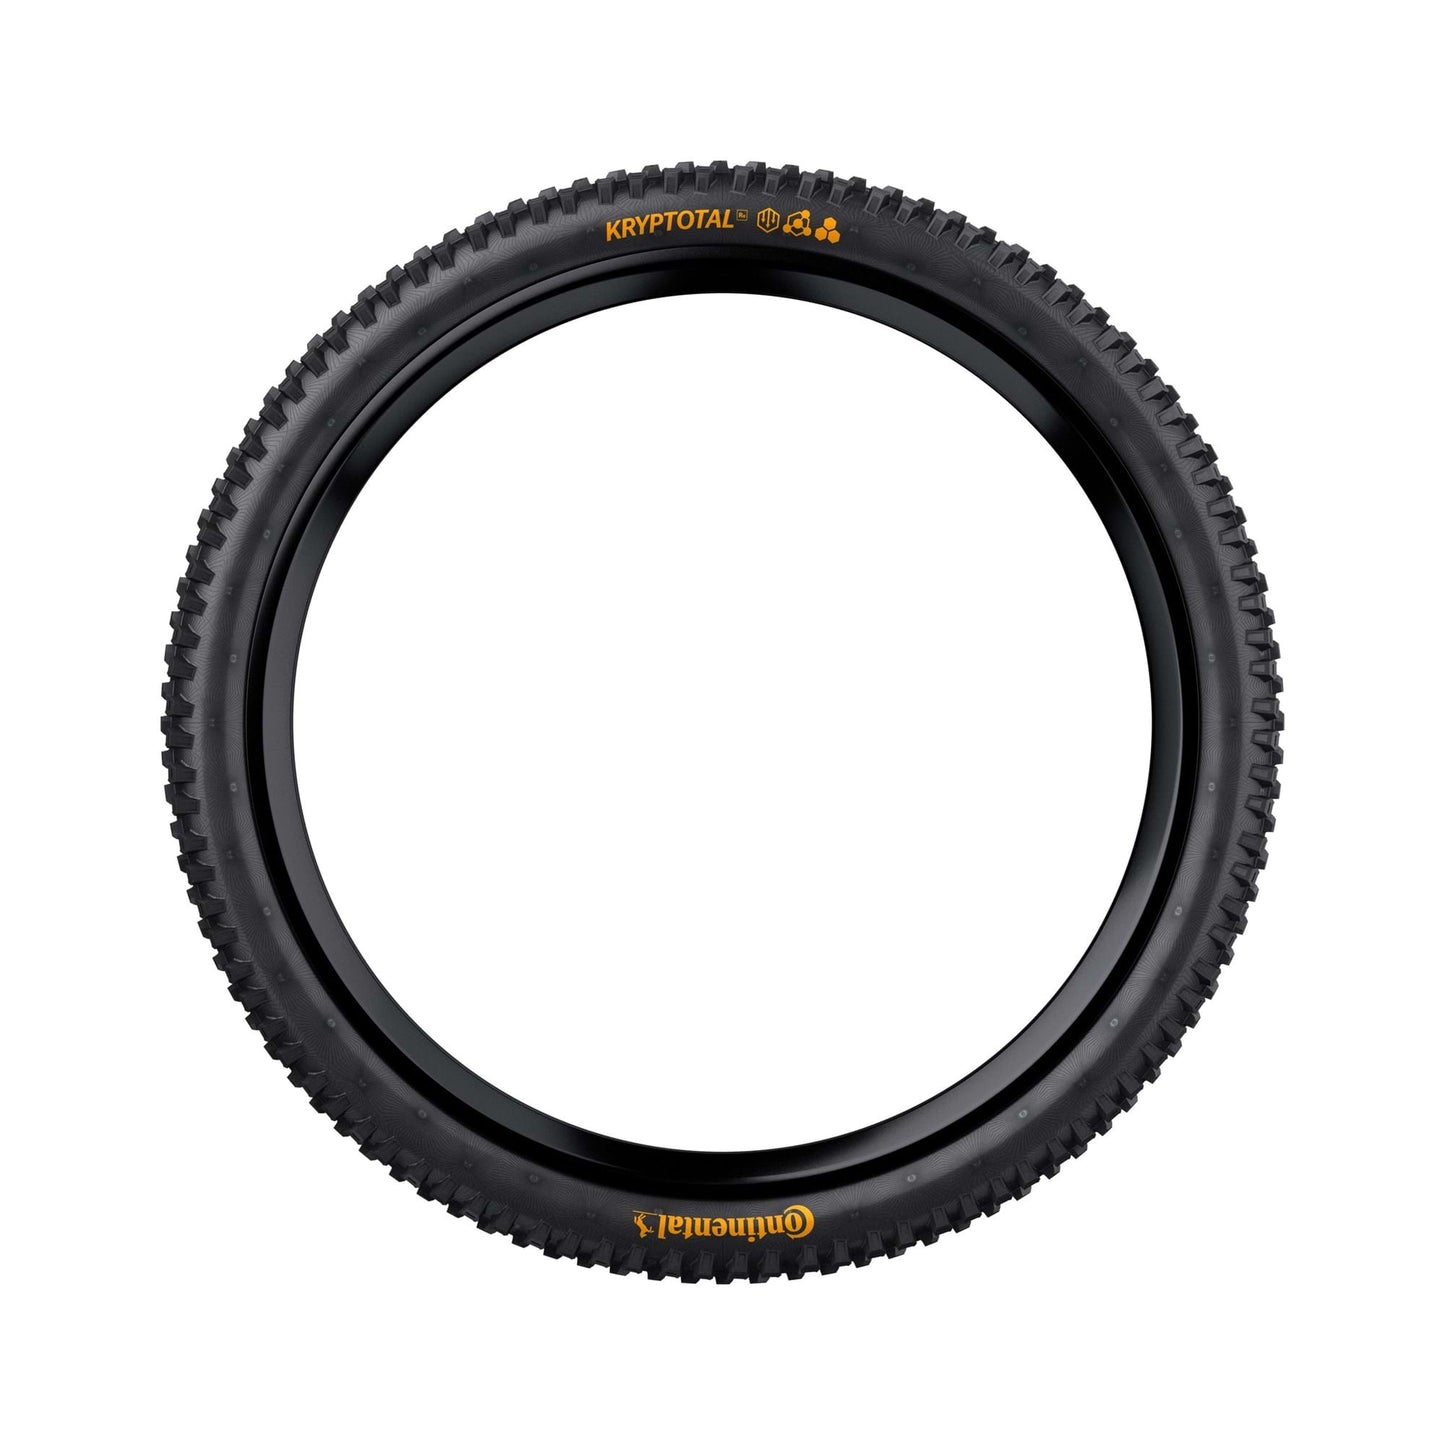 CONTINENTAL KRYPTOTAL REAR DOWNHILL TYRE - SOFT COMPOUND FOLDABLE - 29X2.40"